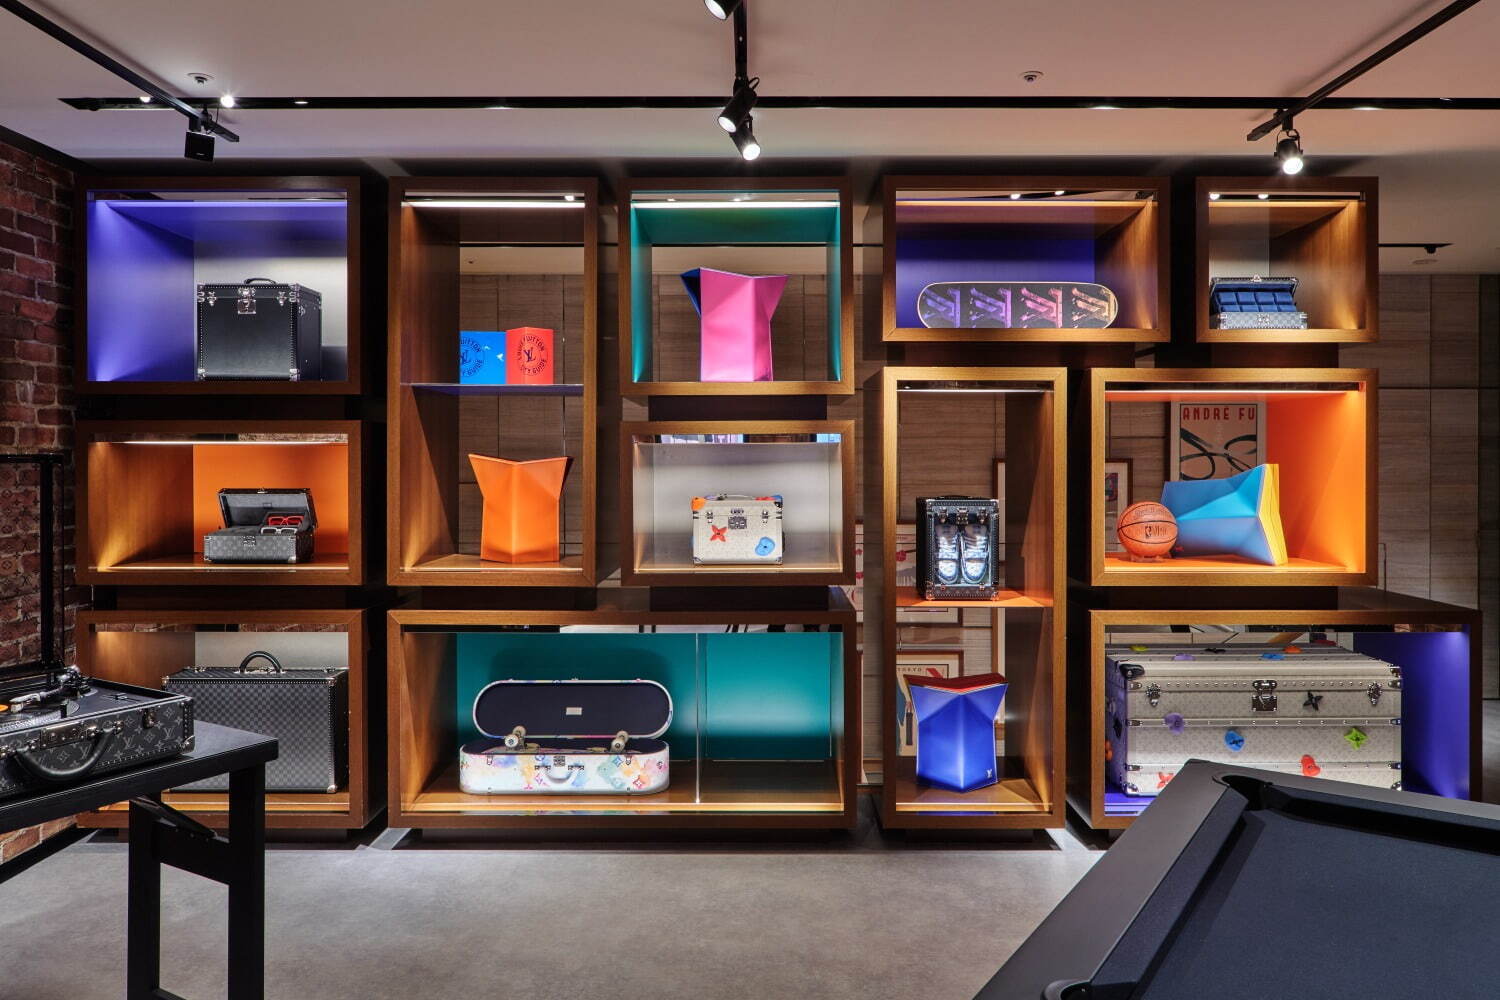 Louis Vuitton to host a limited-time event at the Roppongi Hills store with the theme of "Travel around the World.”